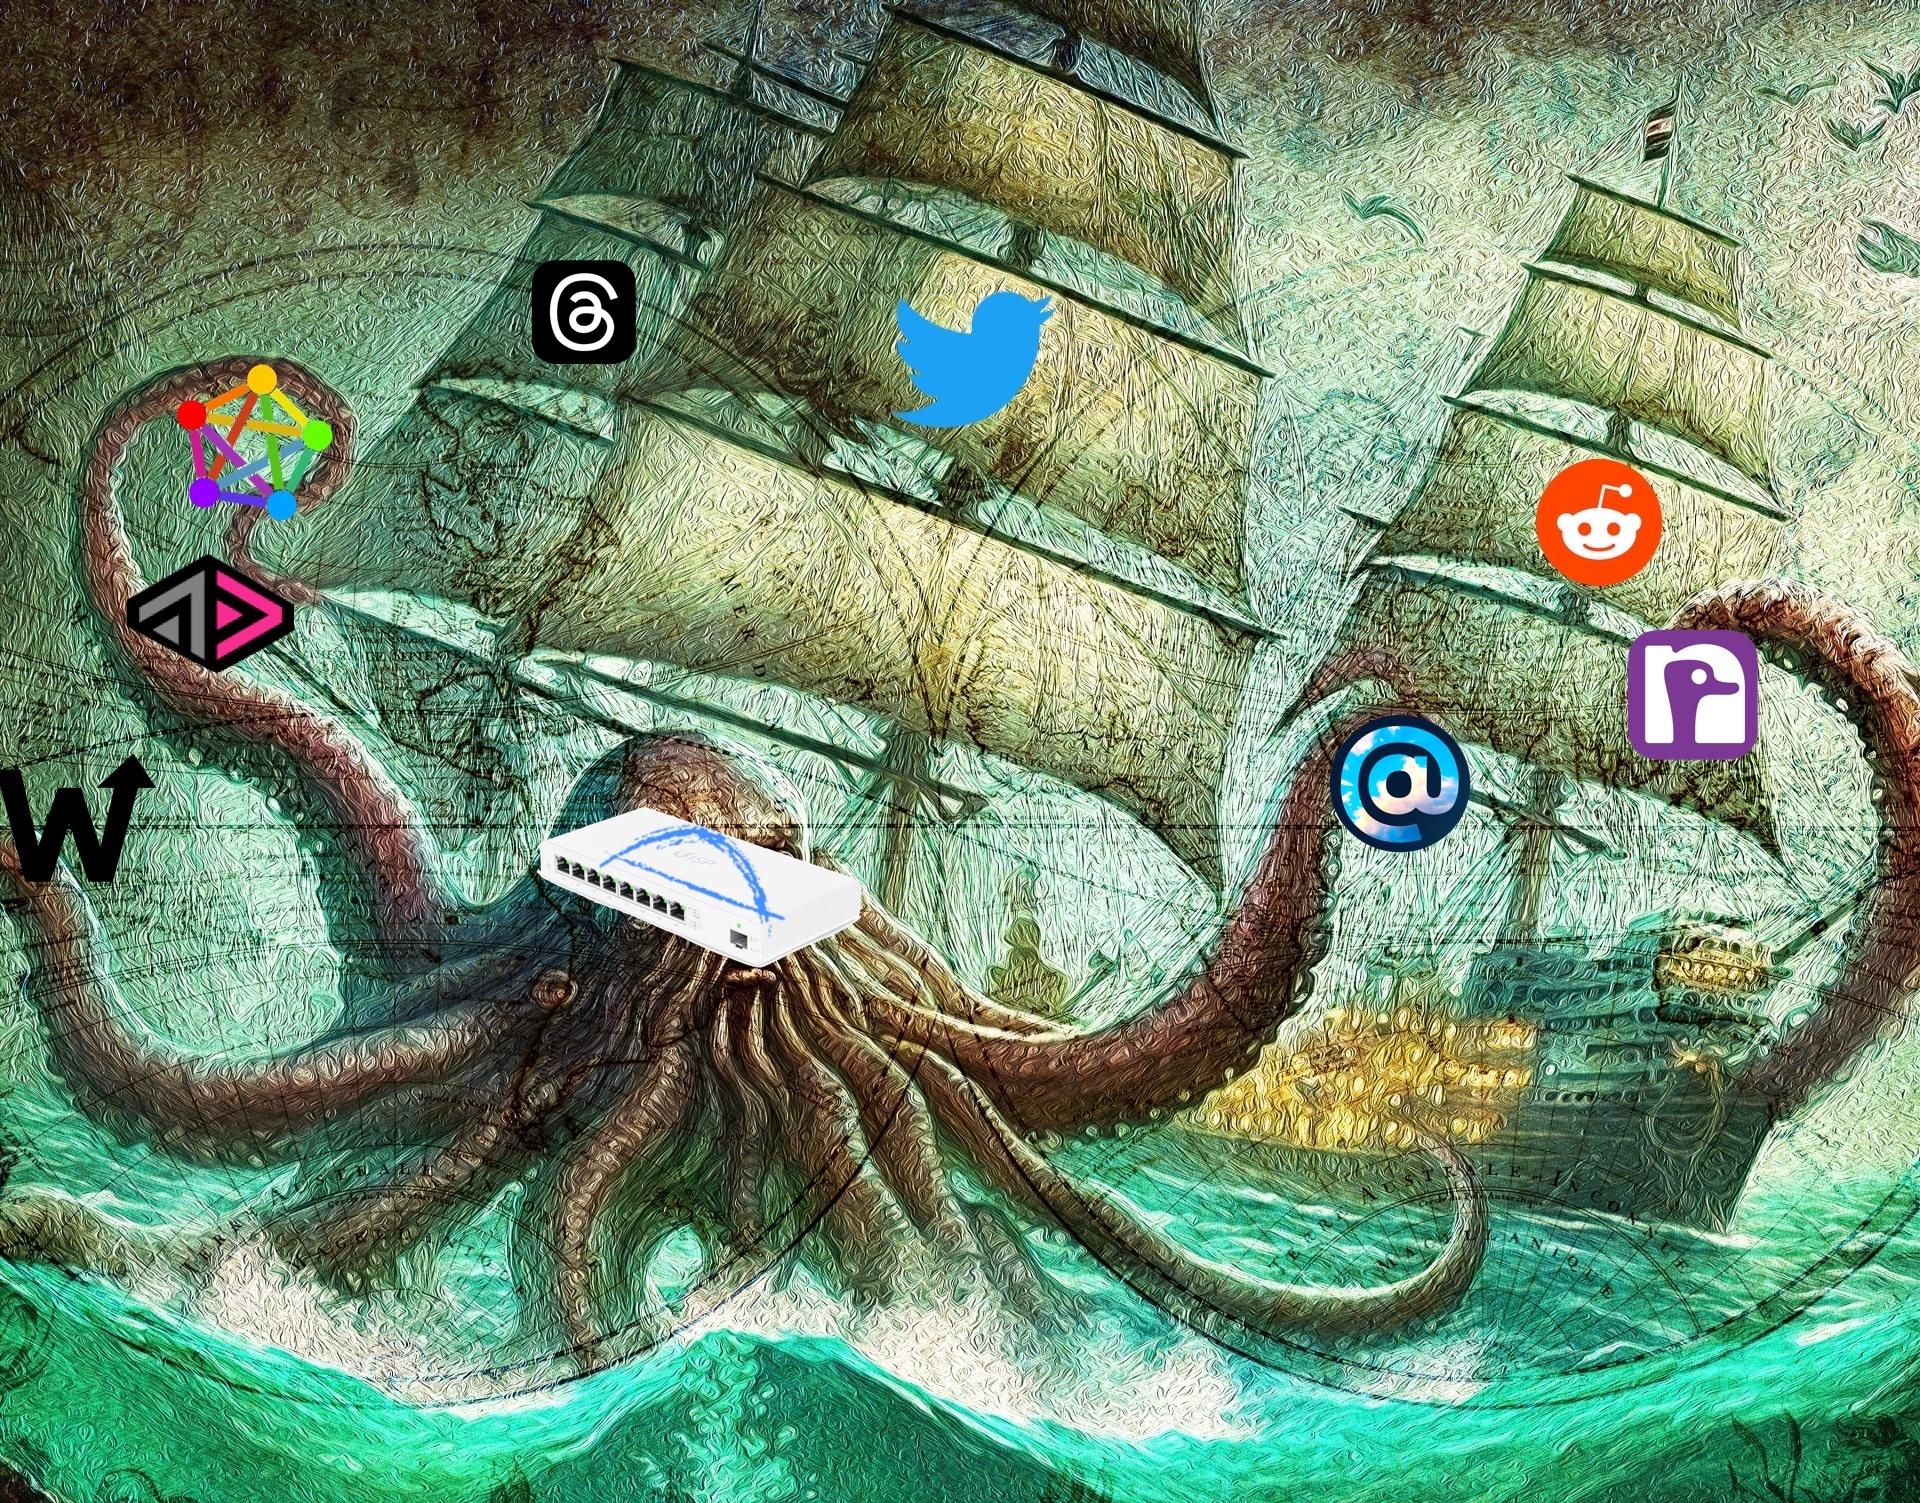 In the old Age of Sail style. A Lovecraftian giant octopus attacks three large sailing ships. The ships' sails have the Twitter, Reddit, and Threads logos. The octopus's tentacles have the webmention, ActivityPub, fediverse, ATProto, and Nostr logos. The octopus's head is a router with the Bridgy (Fed) logo.